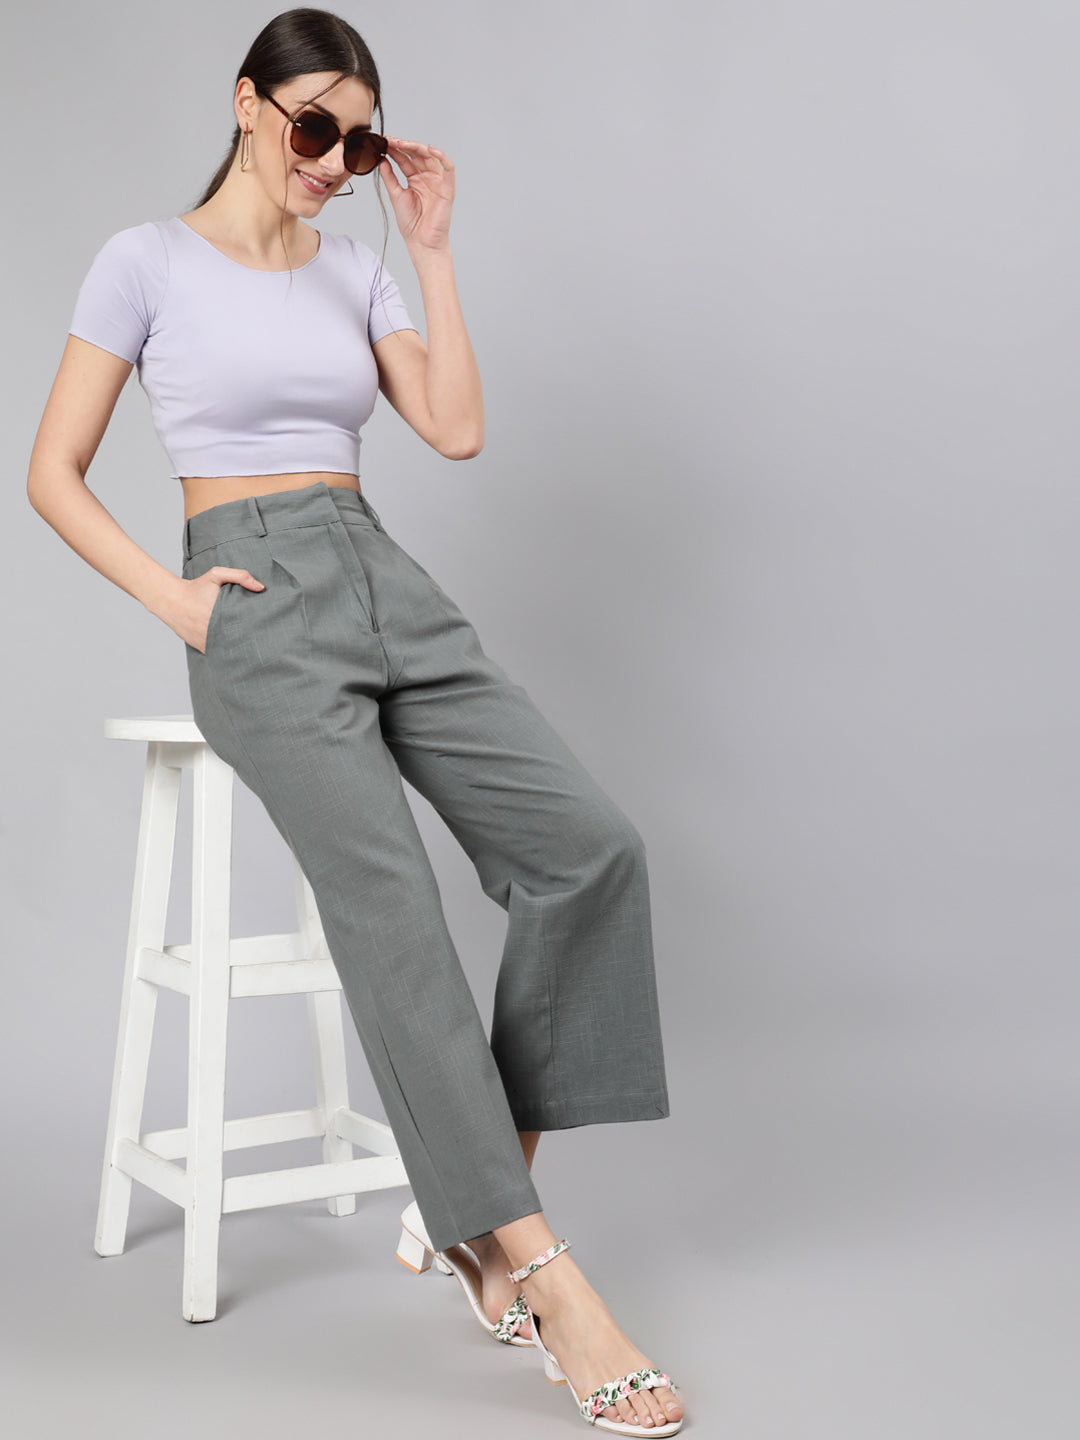 Women's White Layered Parallel Trousers - BitterLime | Western fashion  dresses, Cotton maxi skirts, Women's fashion dresses